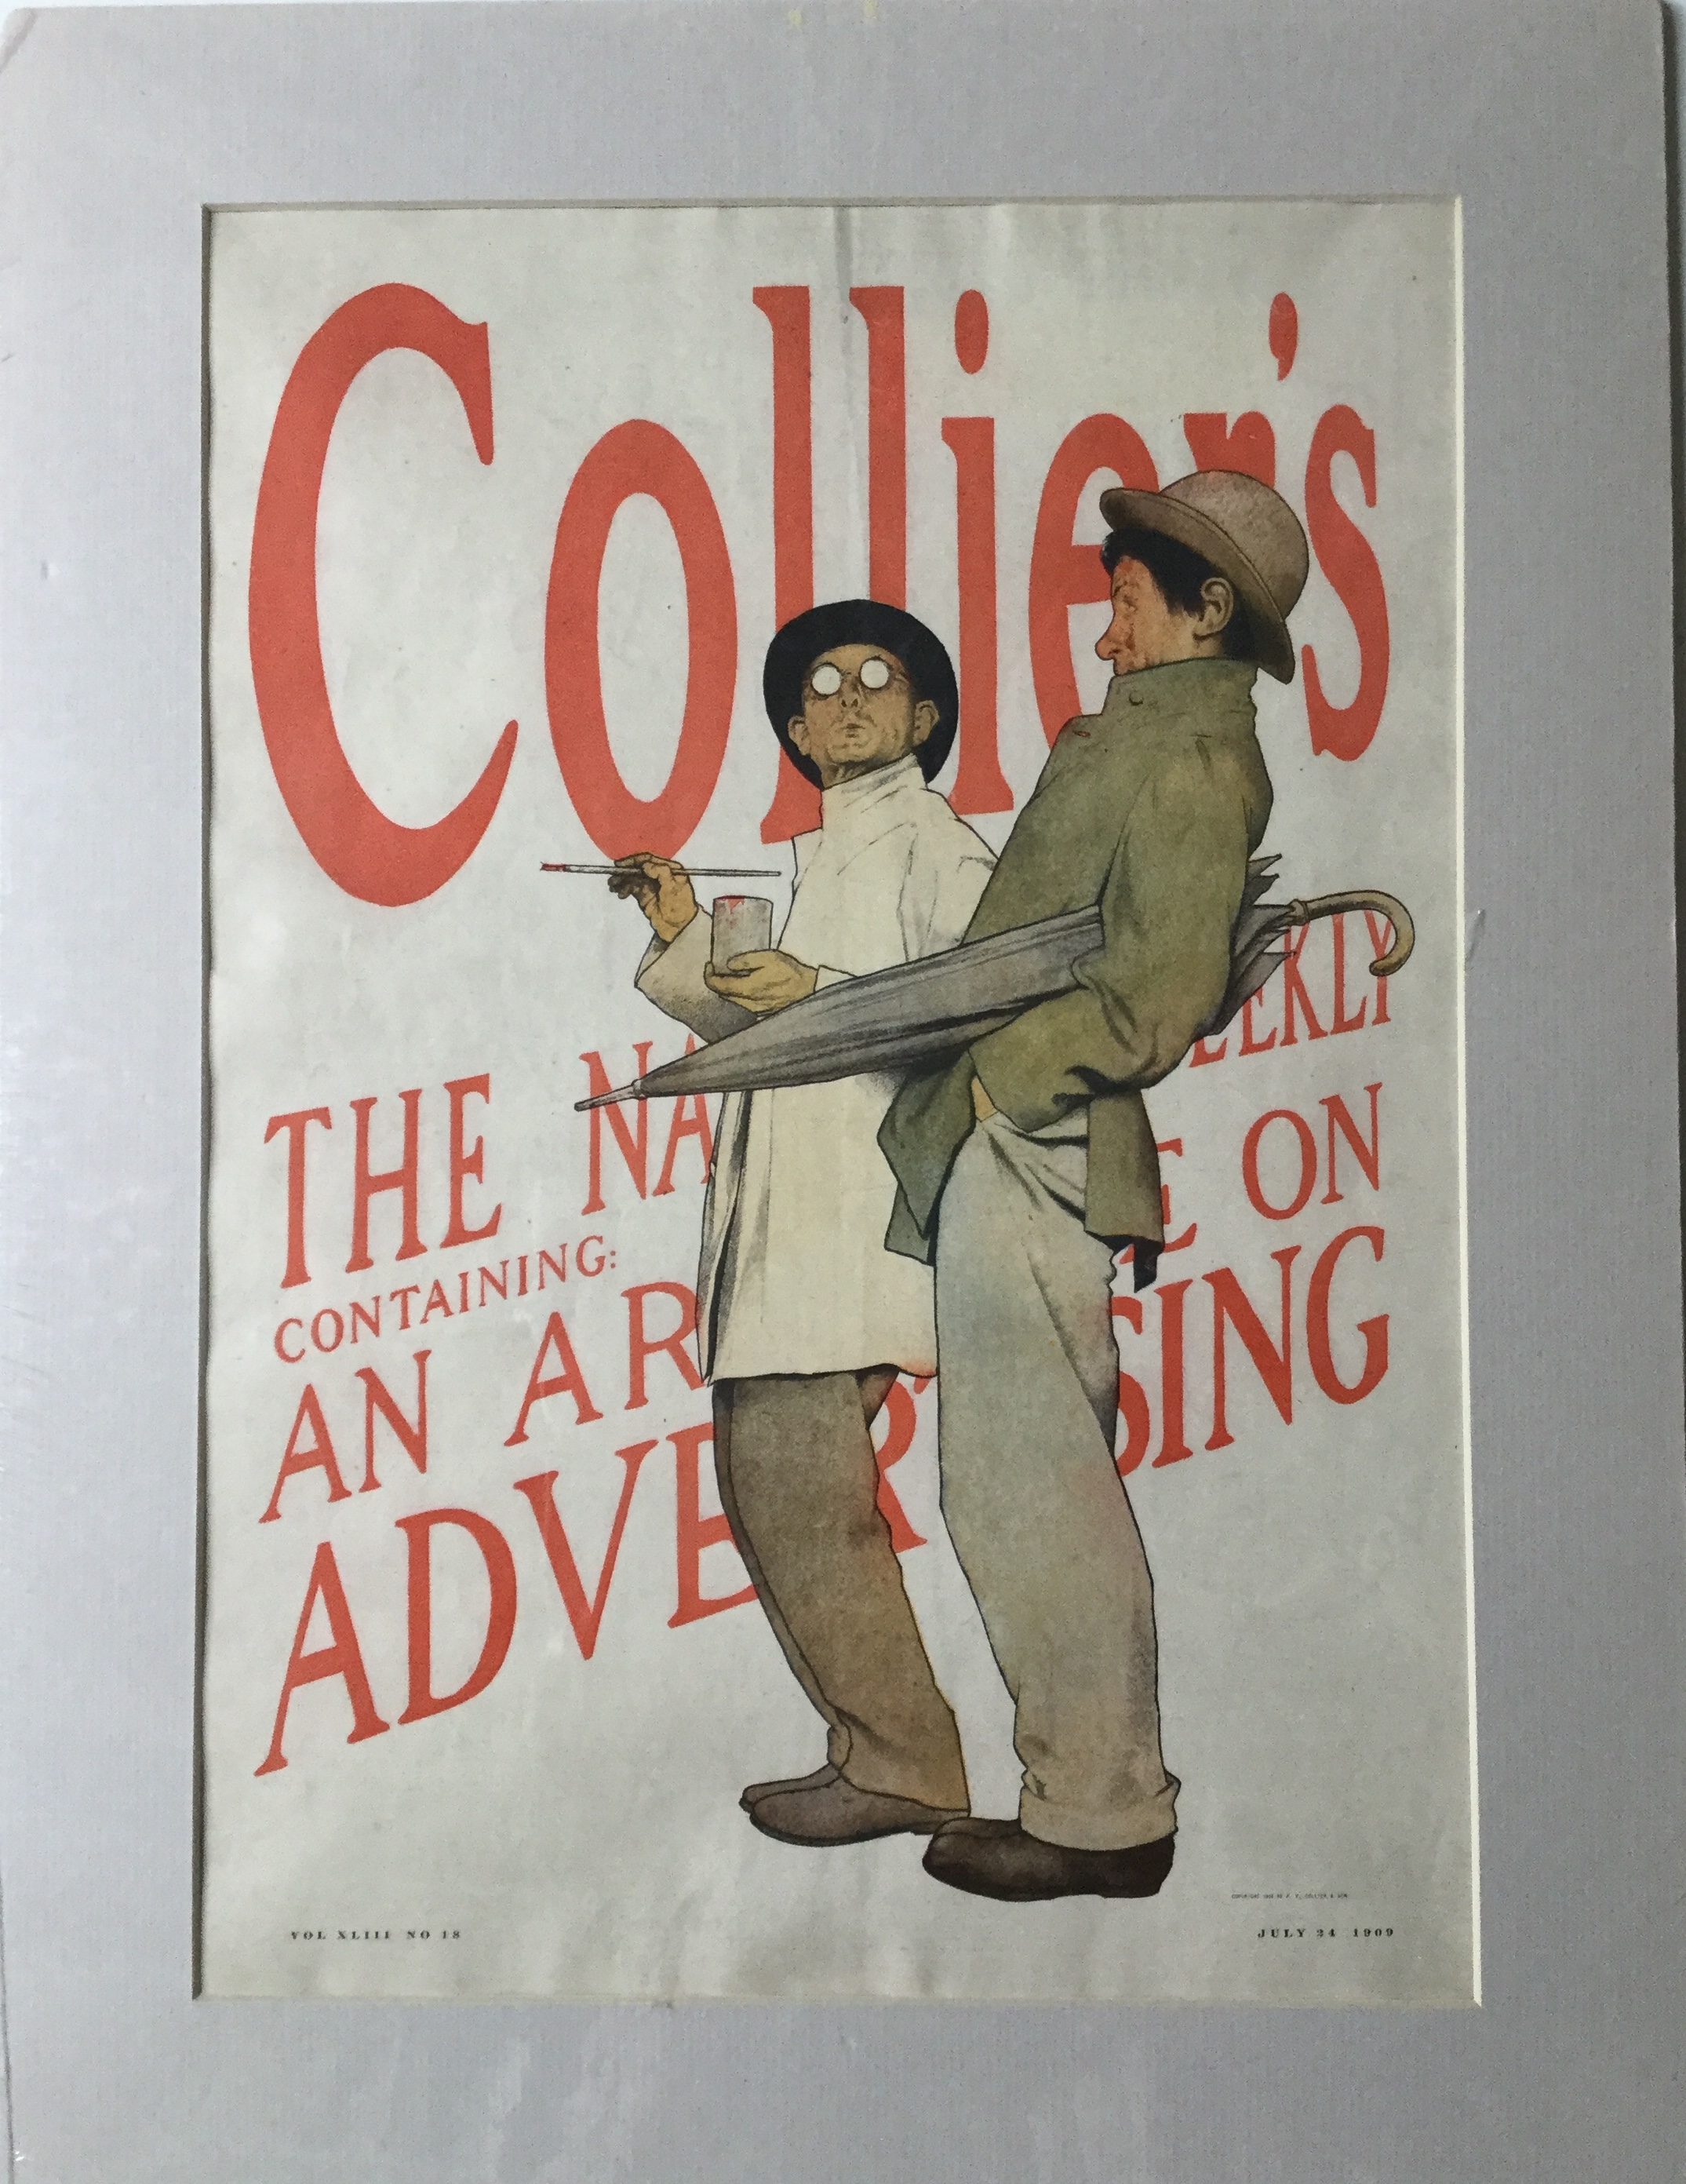 J527	COLLIER’S MAGAZINE - THE ART OF ADVERTISING ‘COVER’ JULY 24, 1909